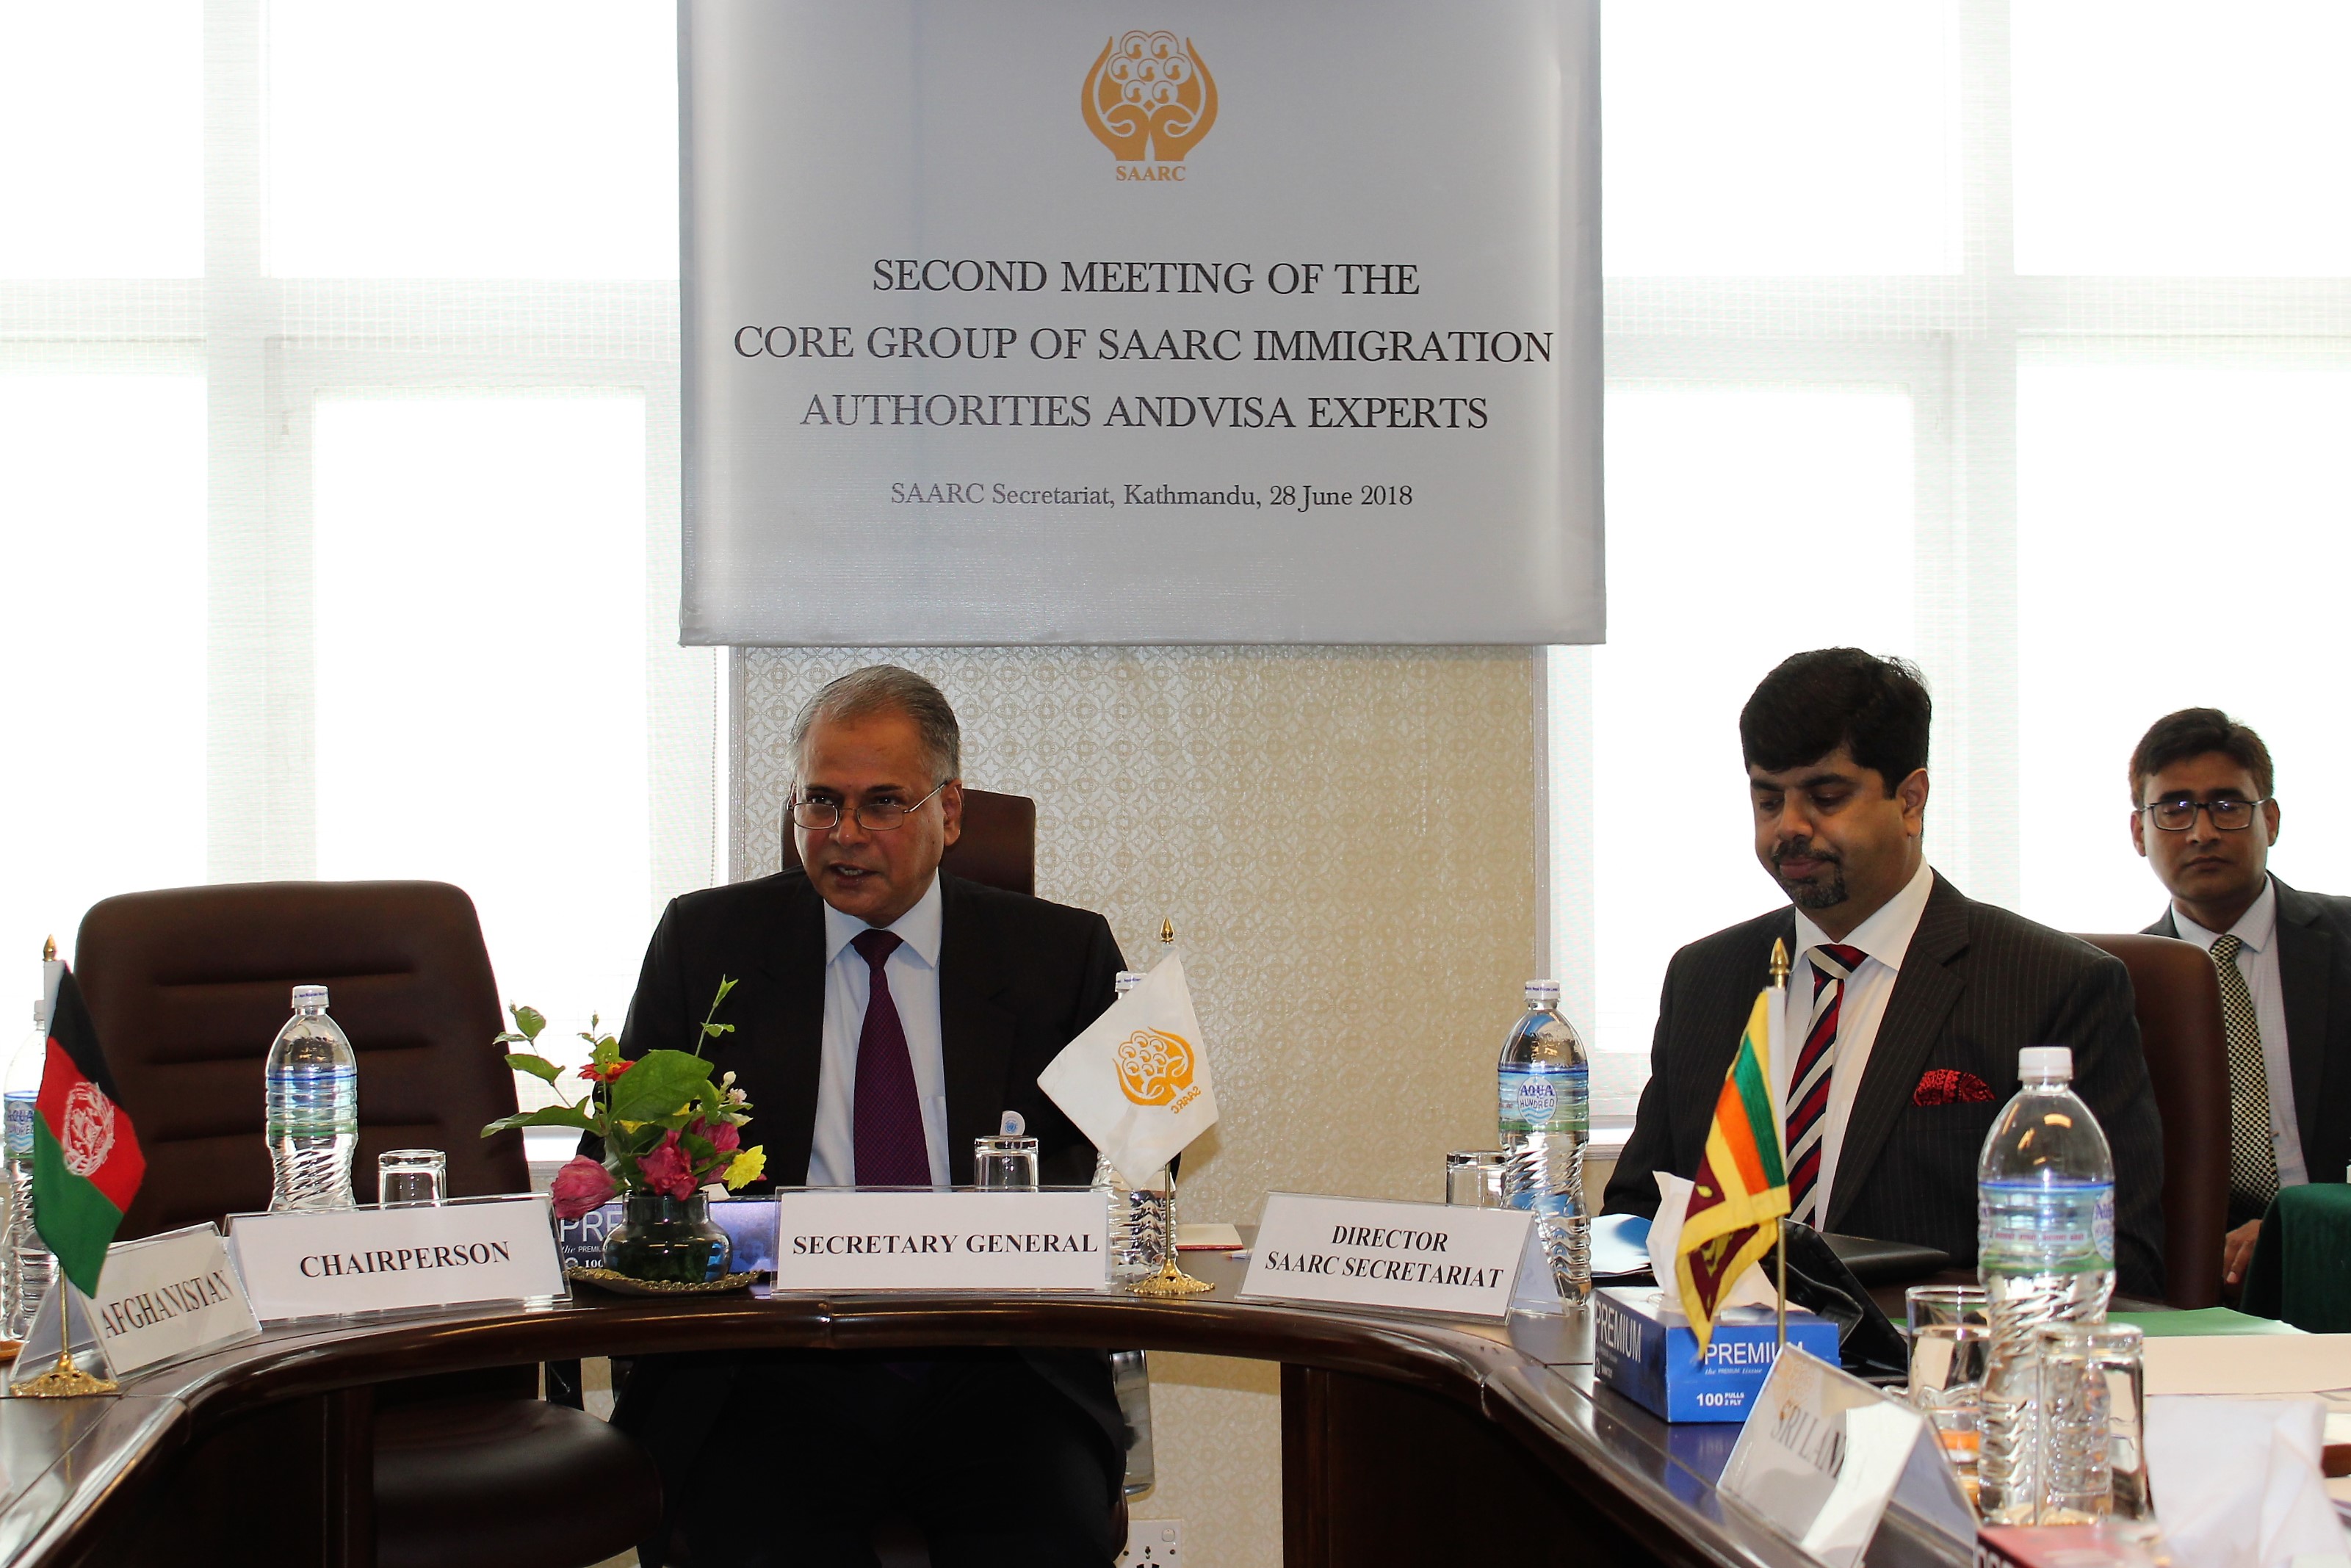 Addressing the meeting of the Core Group, H. E. Mr. Amjad Hussain B. Sial, Secretary General of SAARC